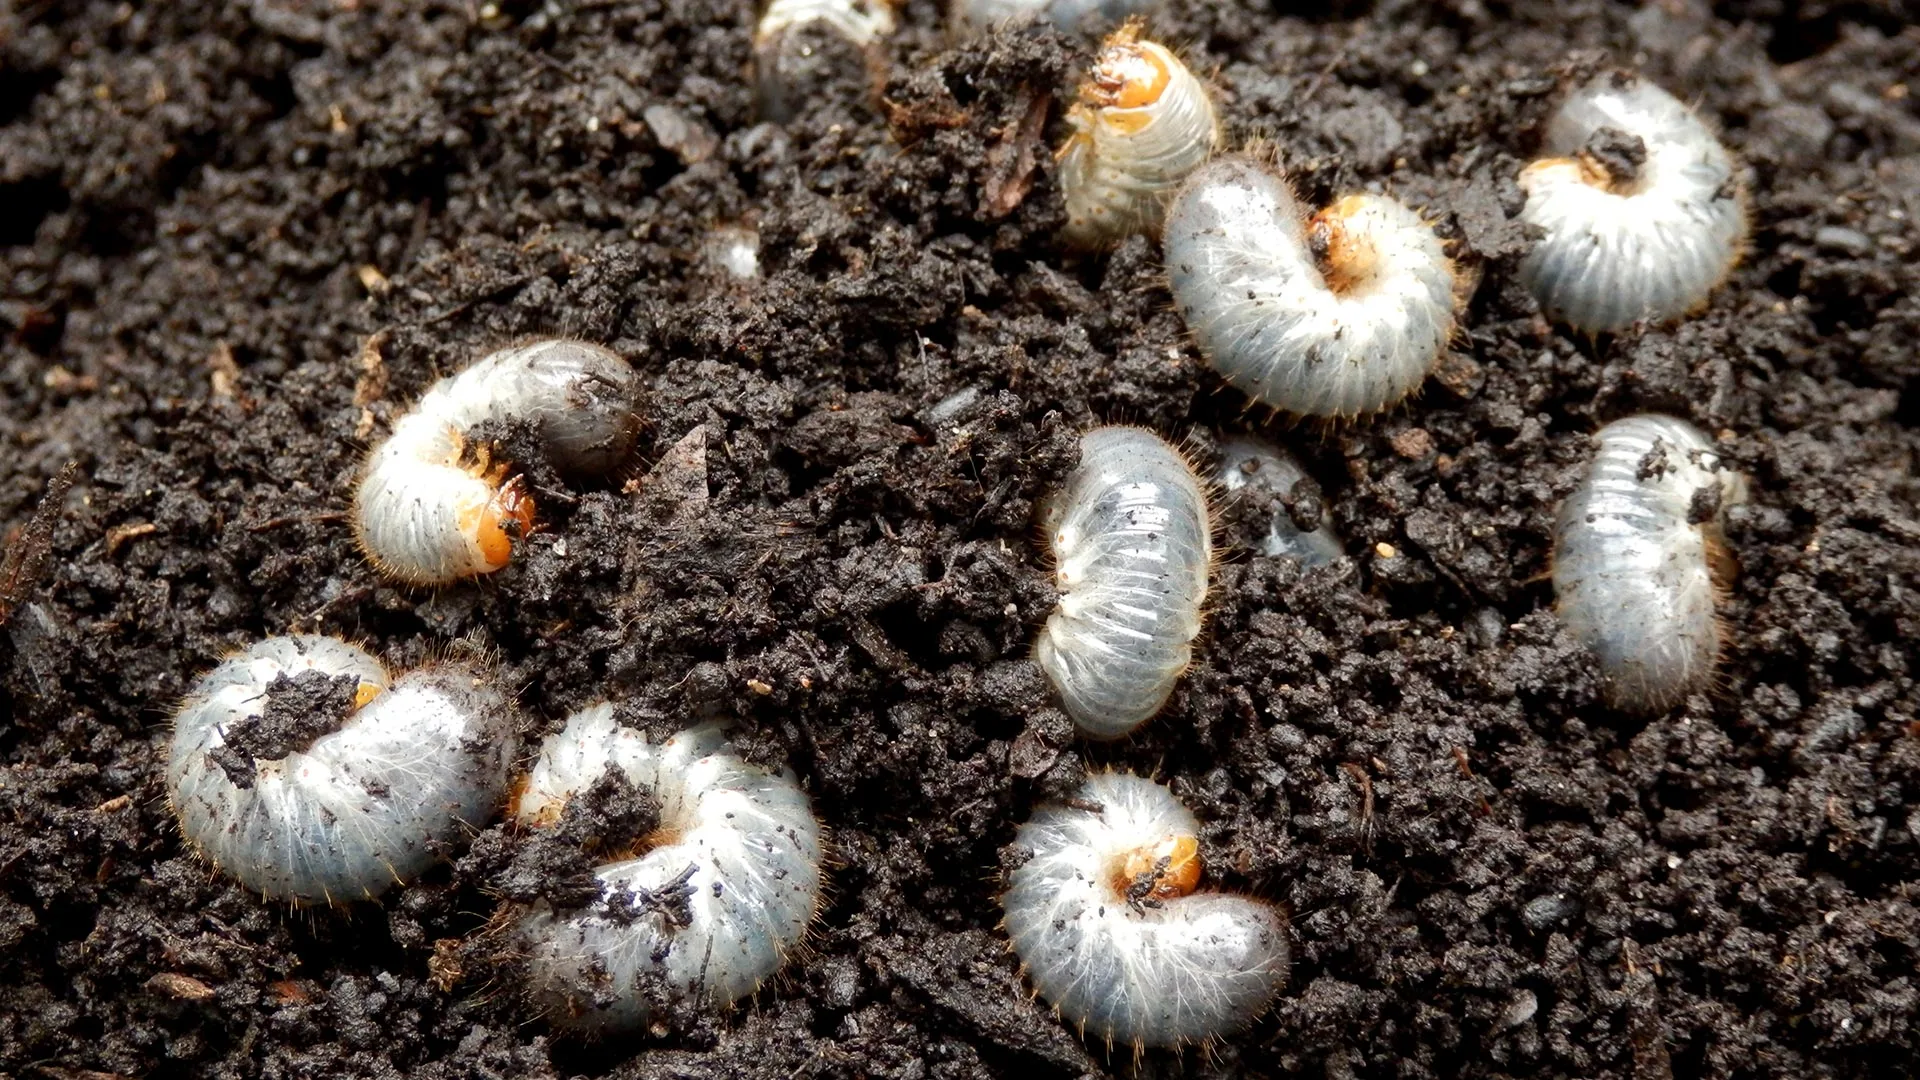 Several grubs in soil on a property in Germantown, TN.